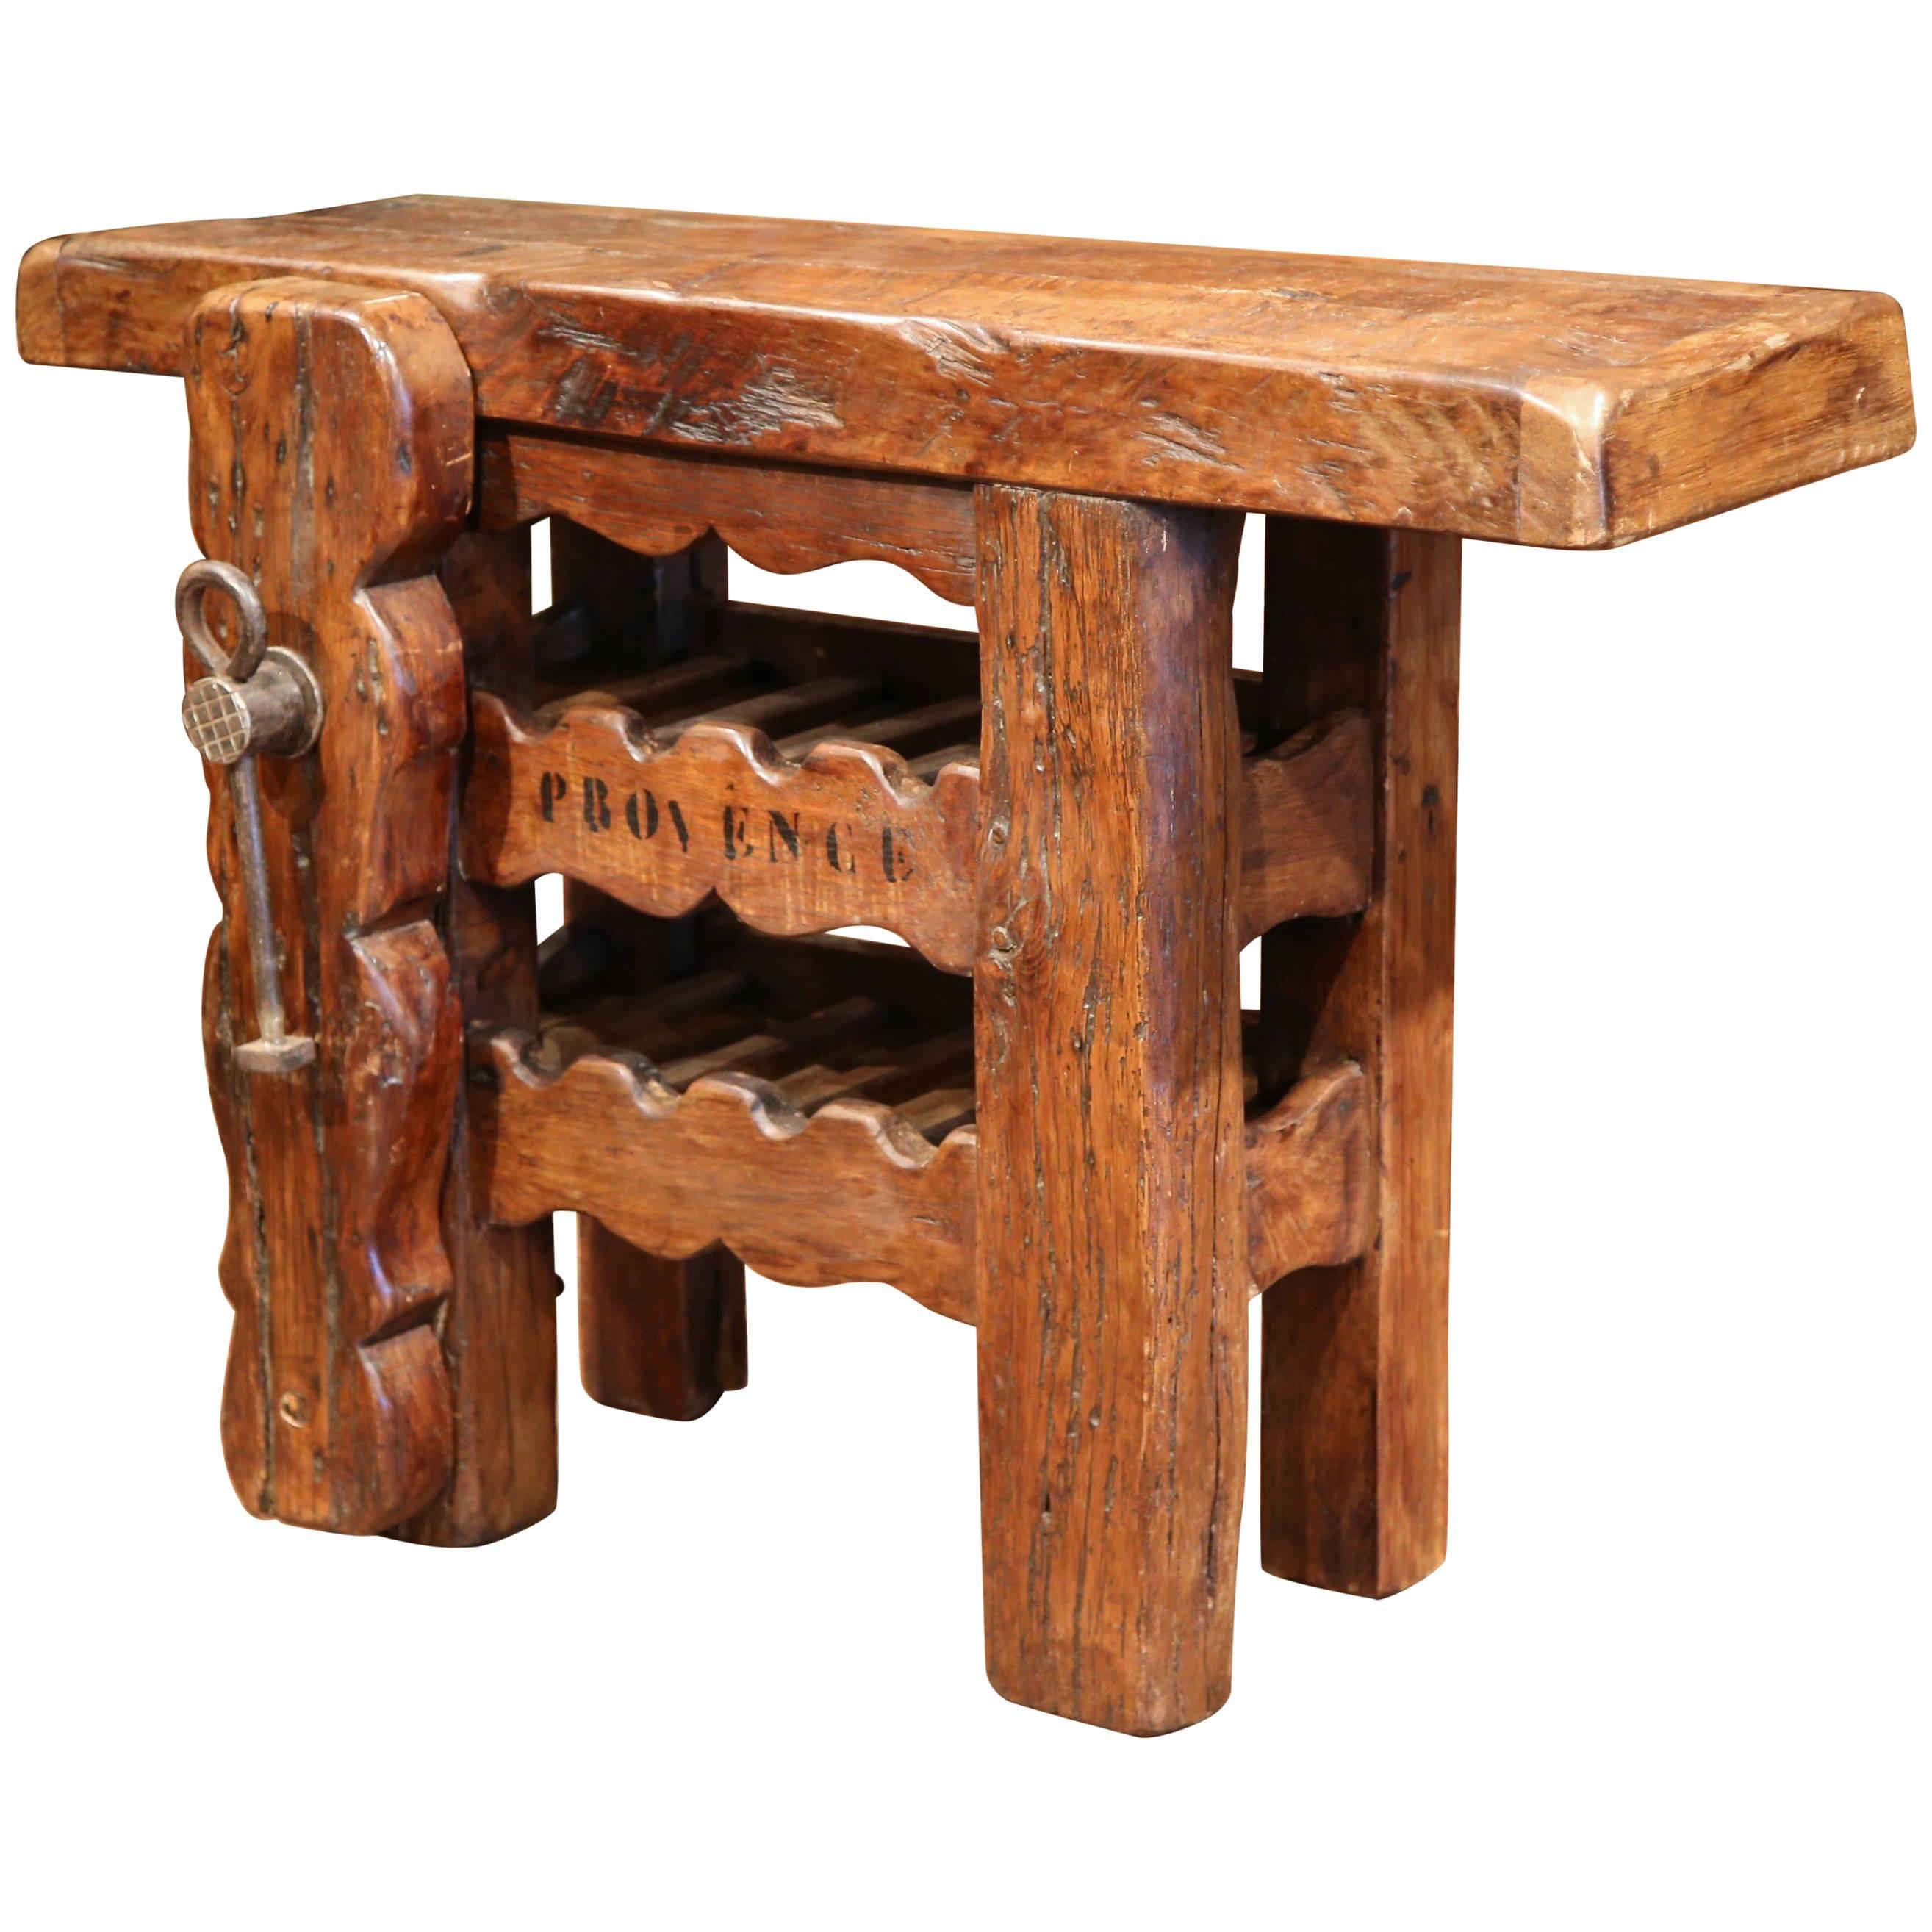 19th Century Rustic French Carpenter Press Table with Wine Bottles Storage Rack